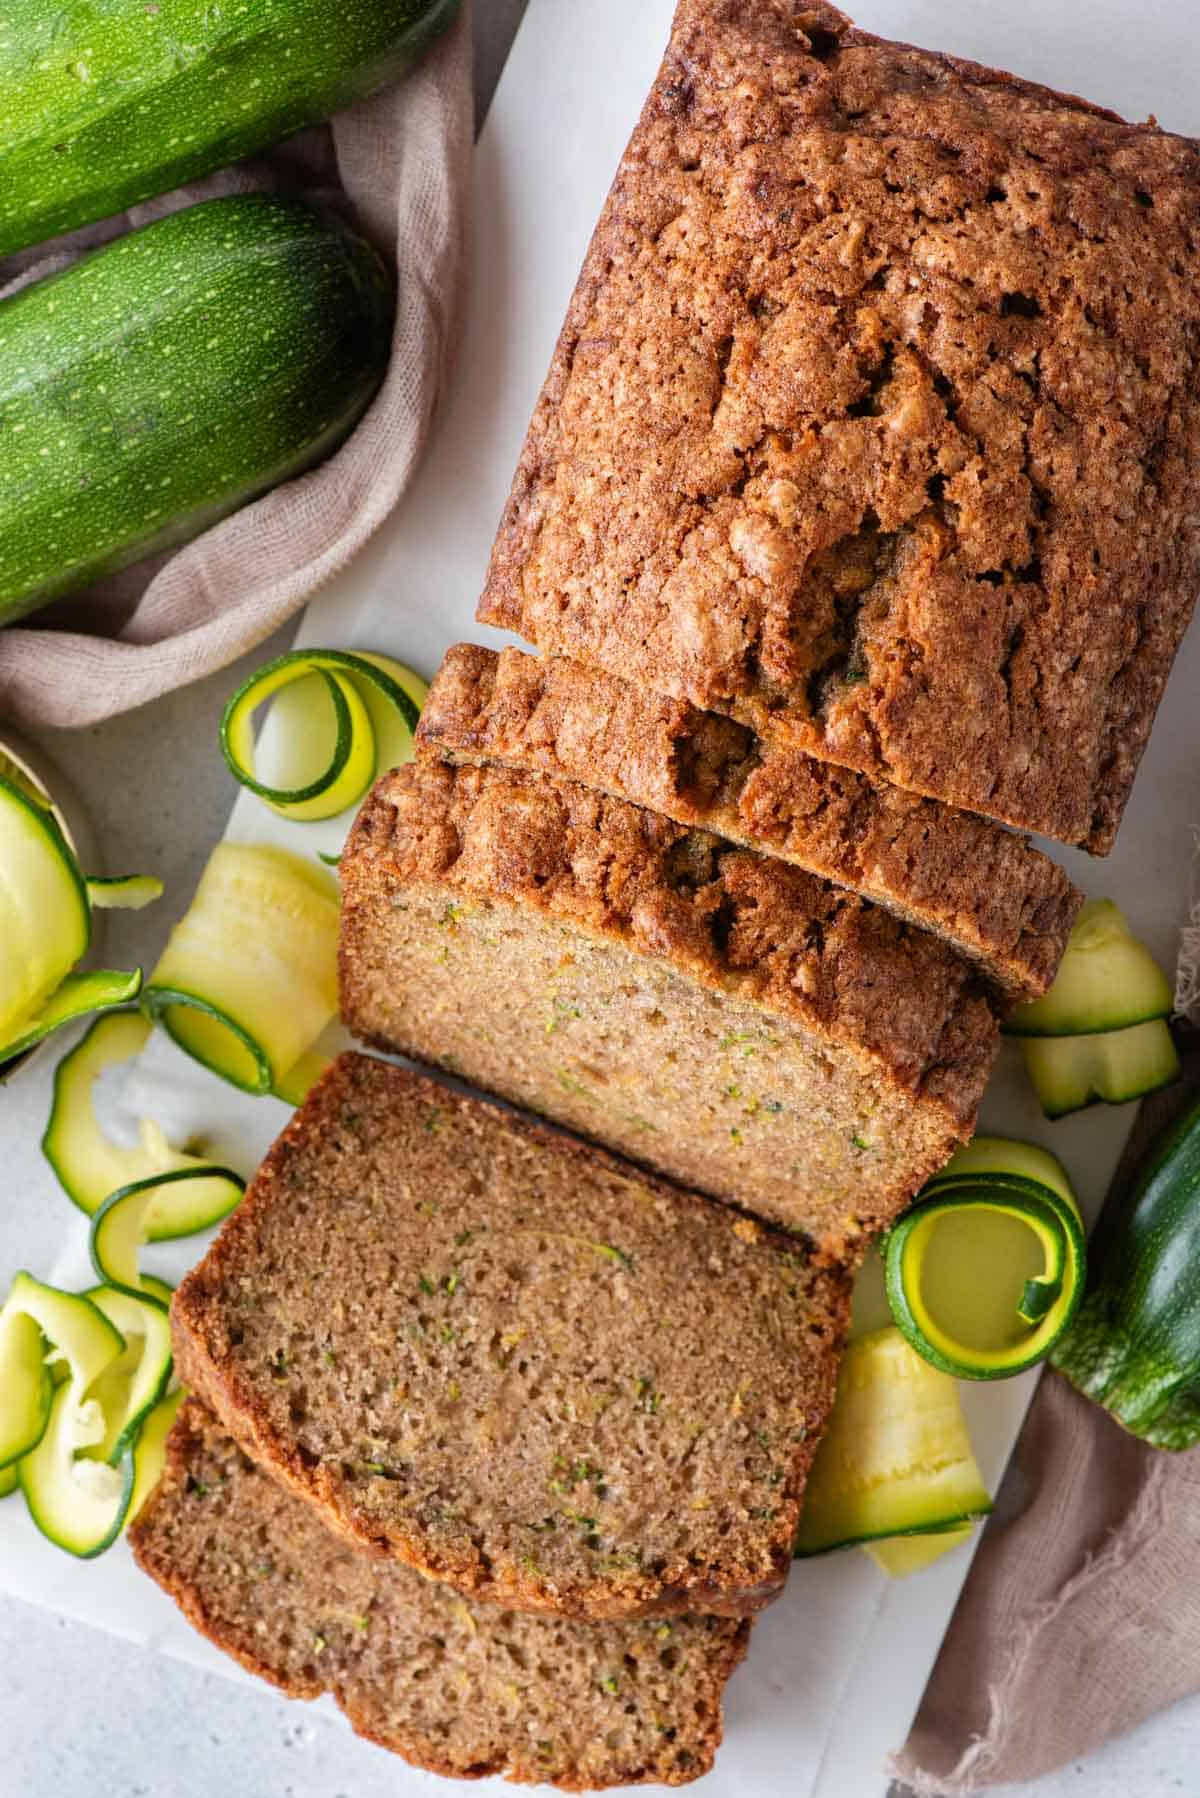 over top view of a loaf of zucchini bread that has been sliced, surrounded by fresh sliced zucchini and whole zucchini